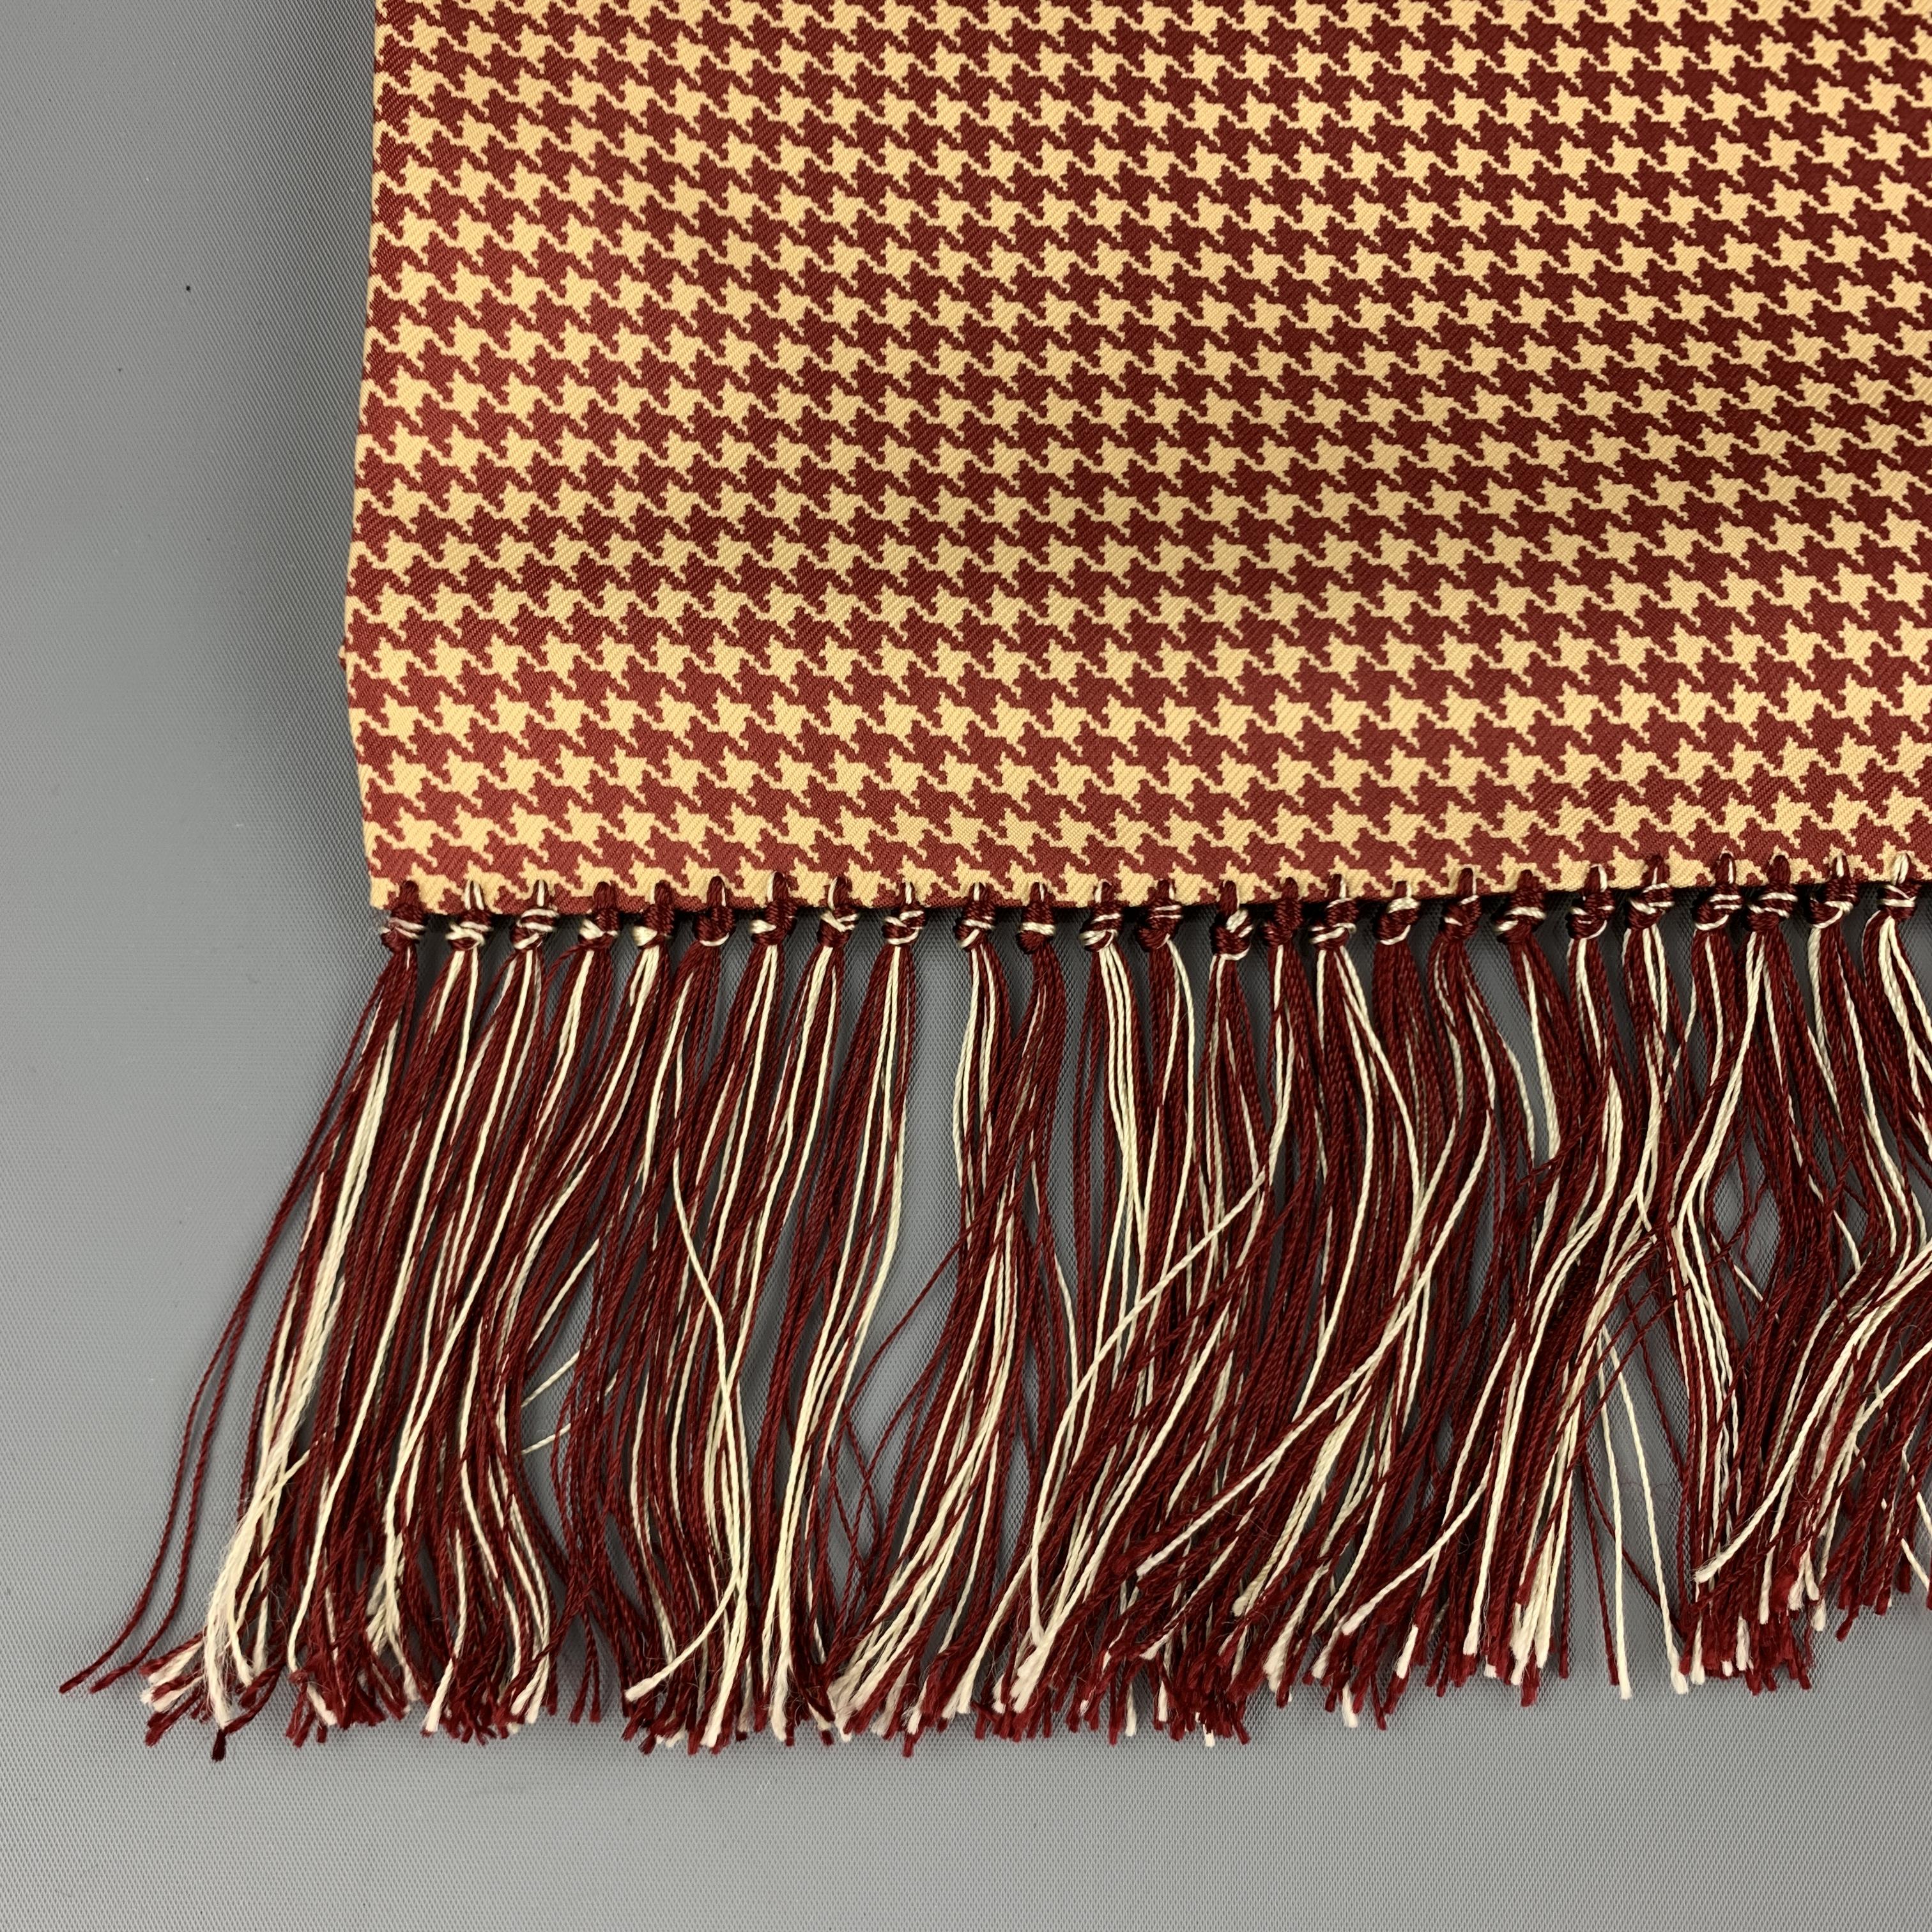 HAYWARD LONDON scarf comes in burgundy and beige houndstooth print silk twill four inch fringe trim. Made in England.

Excellent Pre-Owned Condition.

57.5 x 19.5 in.